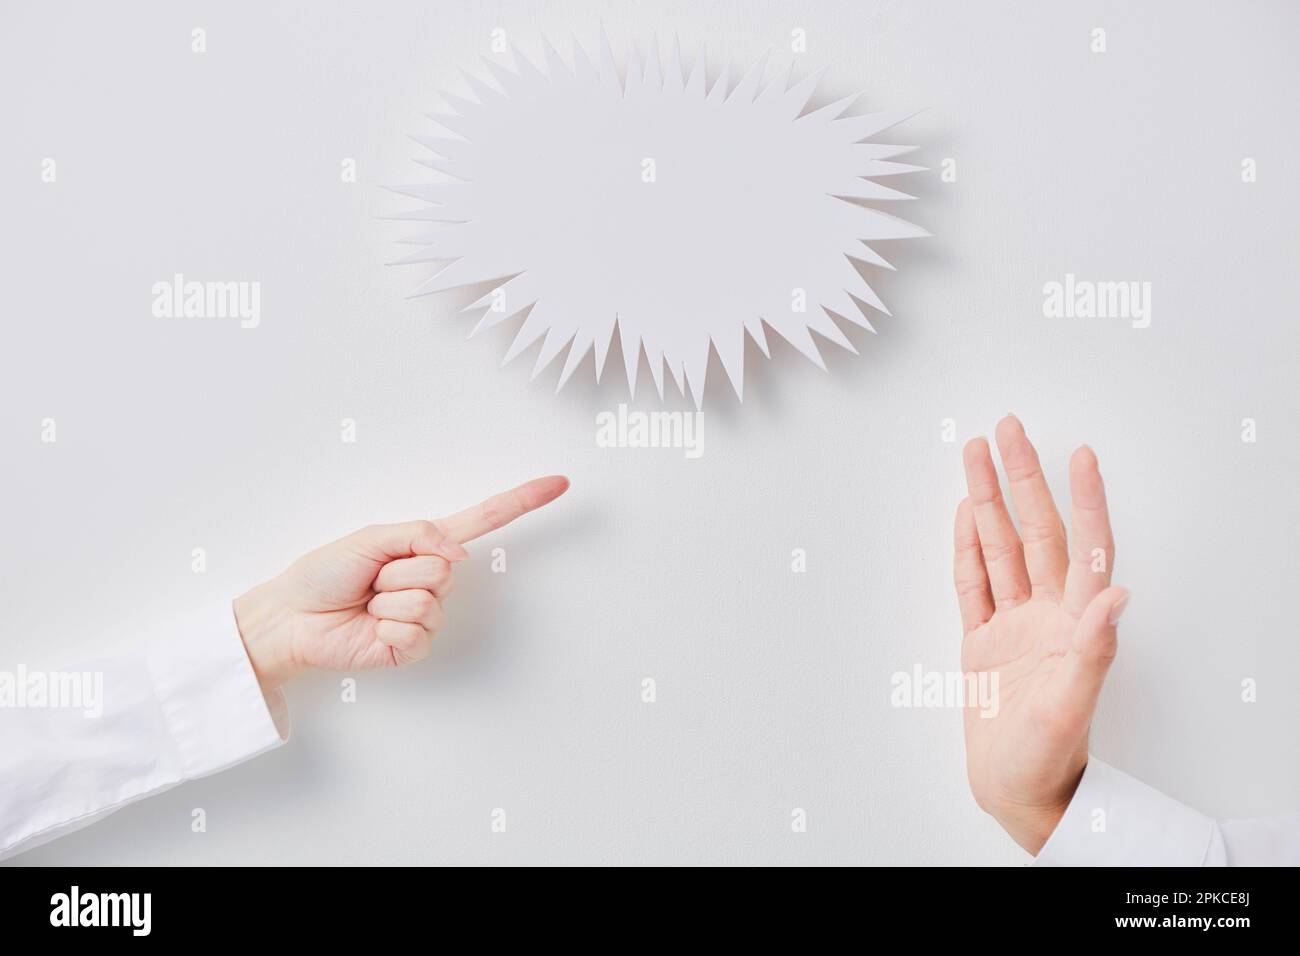 Jagged speech balloon and fighting man and woman's hands Stock Photo